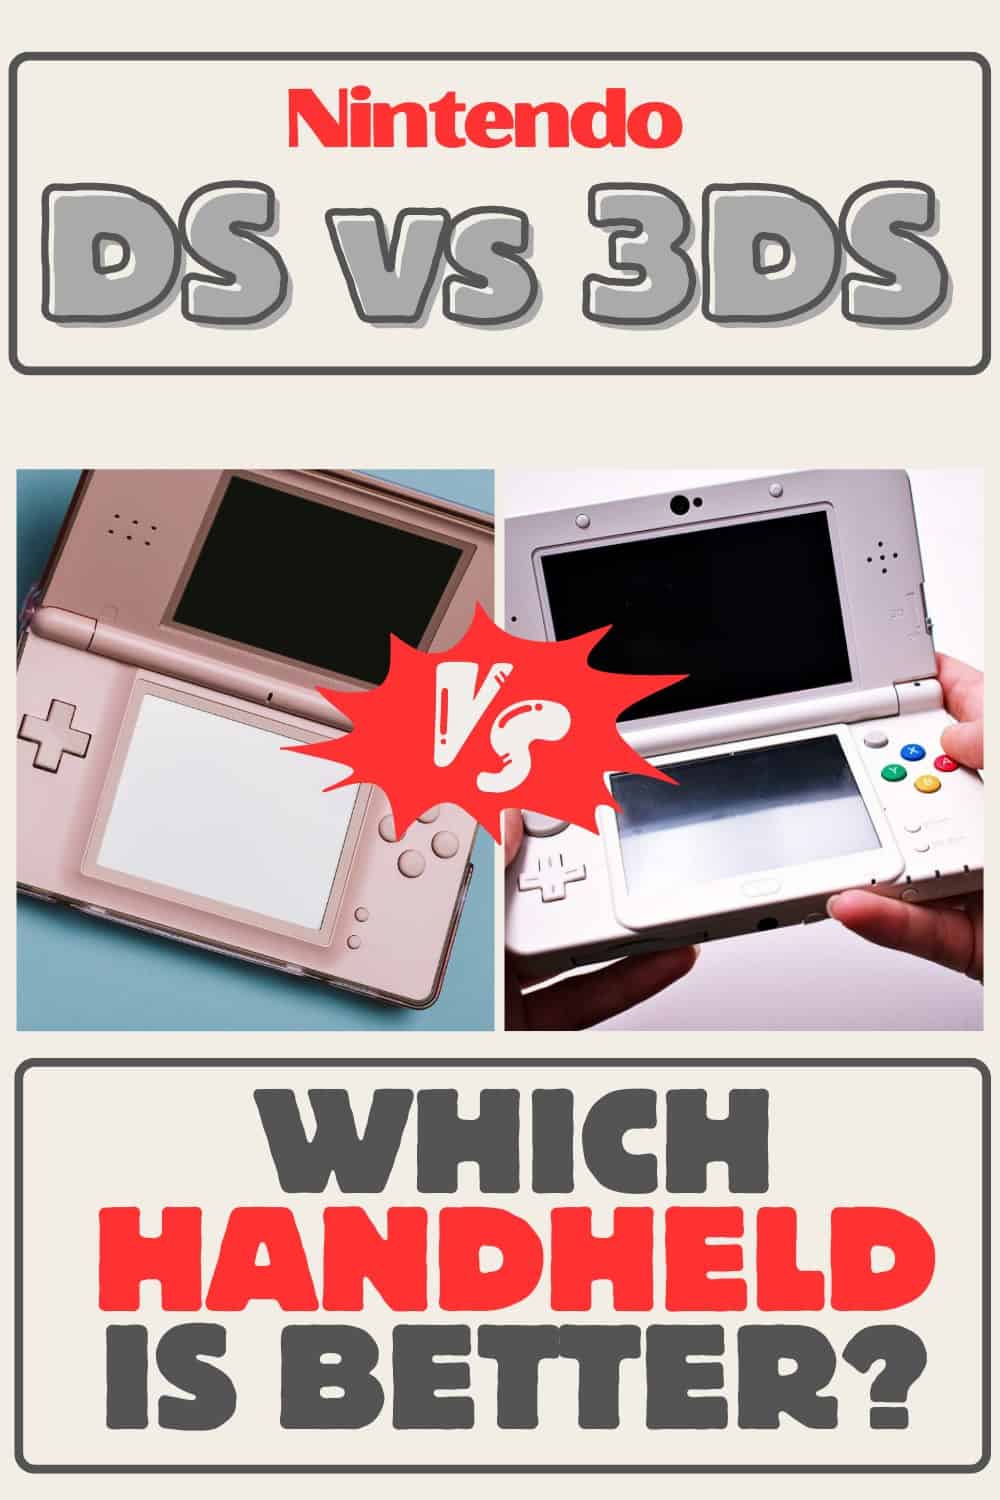 Is the Nintendo 3DS Better than the DS?